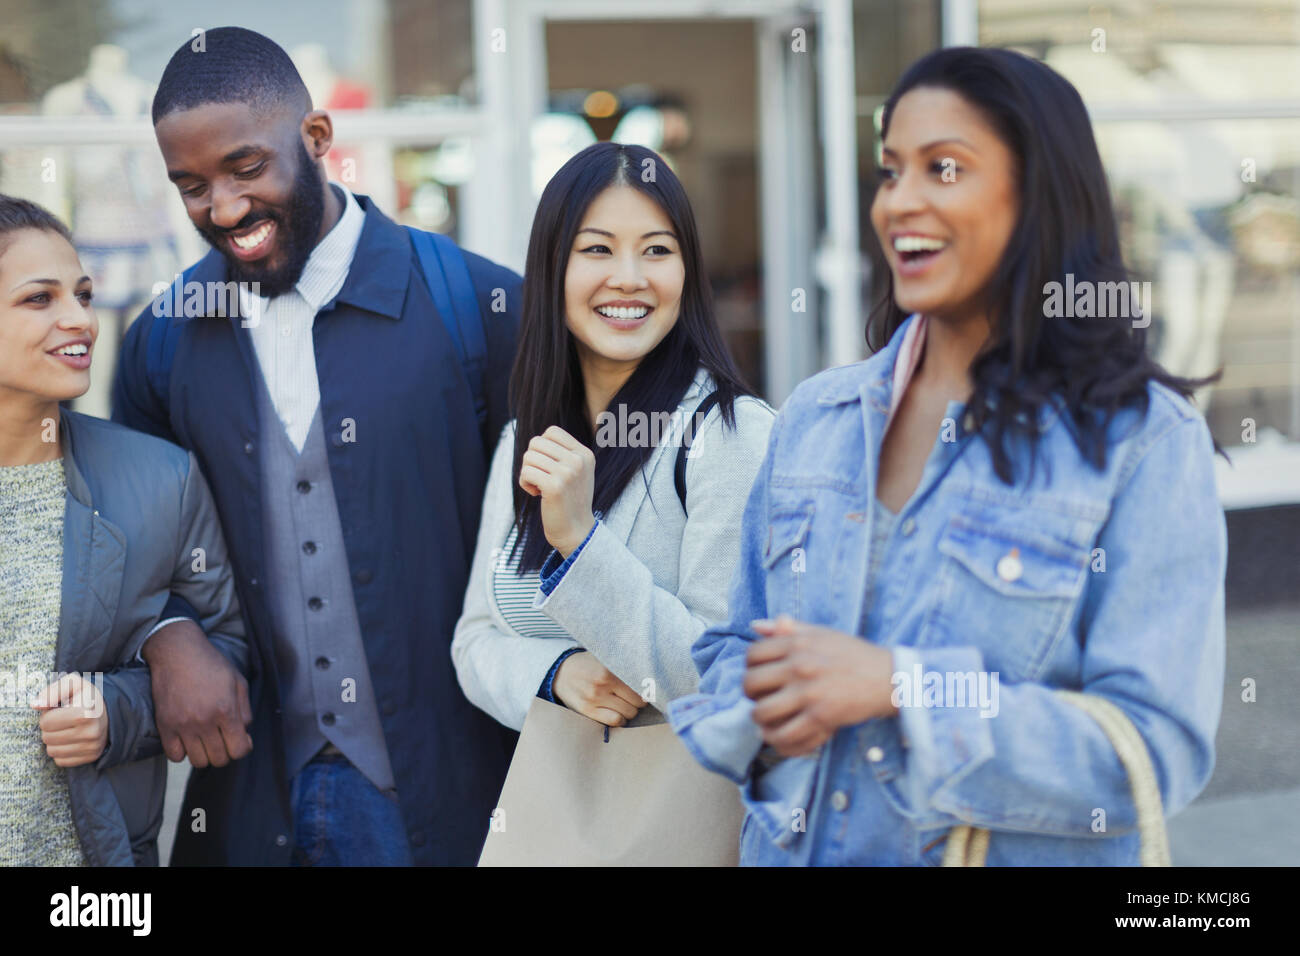 Young friends laughing at storefront Stock Photo